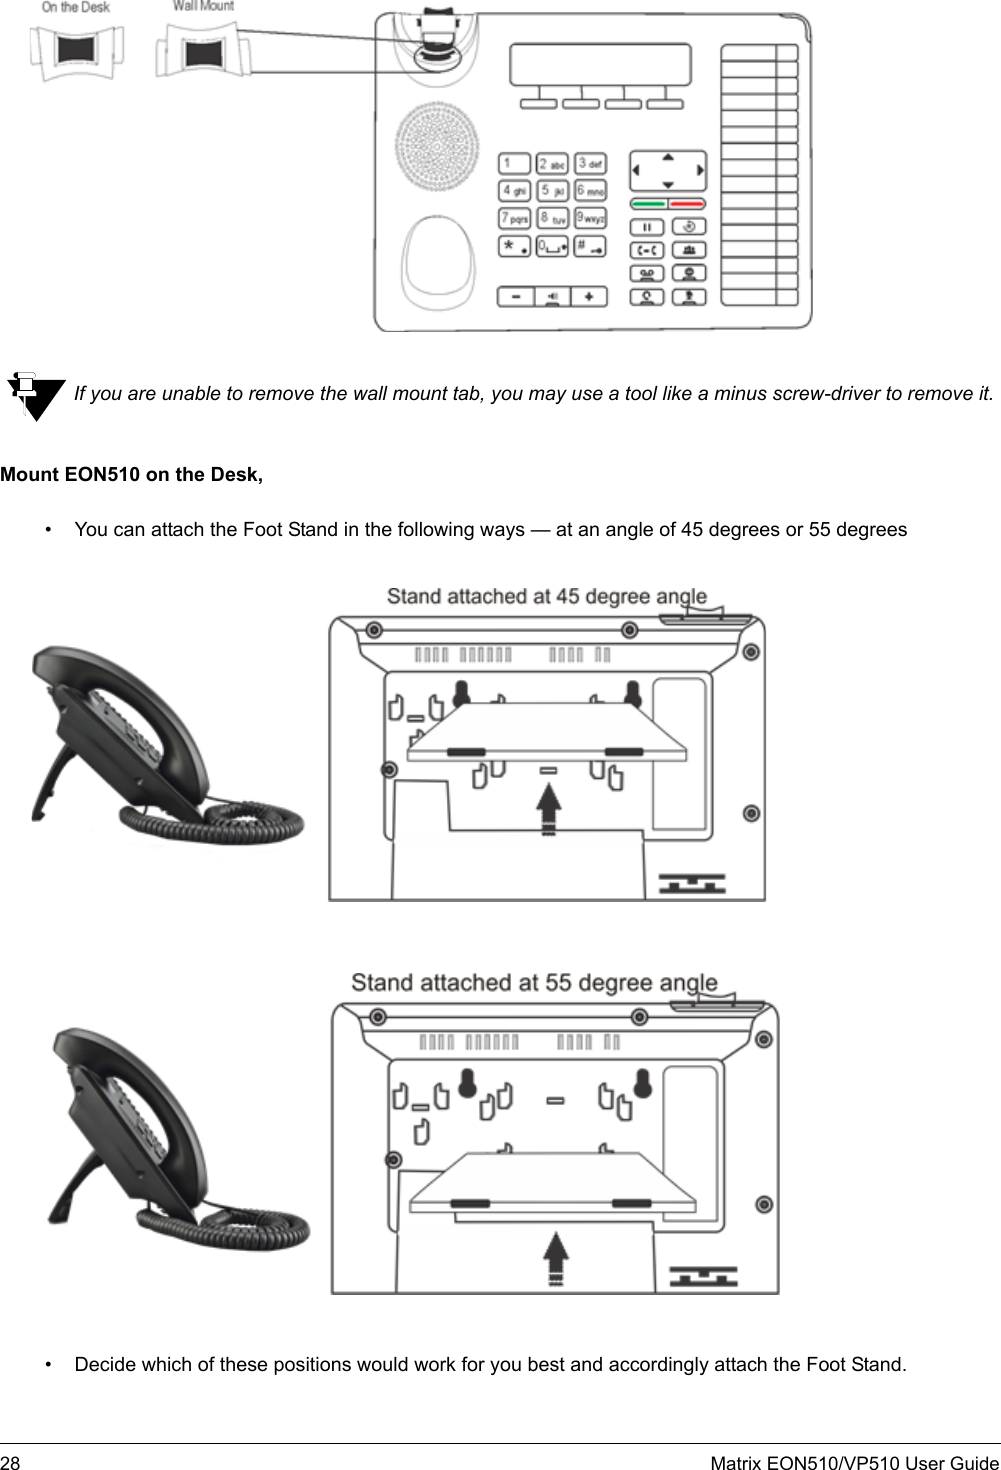 28 Matrix EON510/VP510 User GuideIf you are unable to remove the wall mount tab, you may use a tool like a minus screw-driver to remove it.Mount EON510 on the Desk,• You can attach the Foot Stand in the following ways — at an angle of 45 degrees or 55 degrees• Decide which of these positions would work for you best and accordingly attach the Foot Stand.